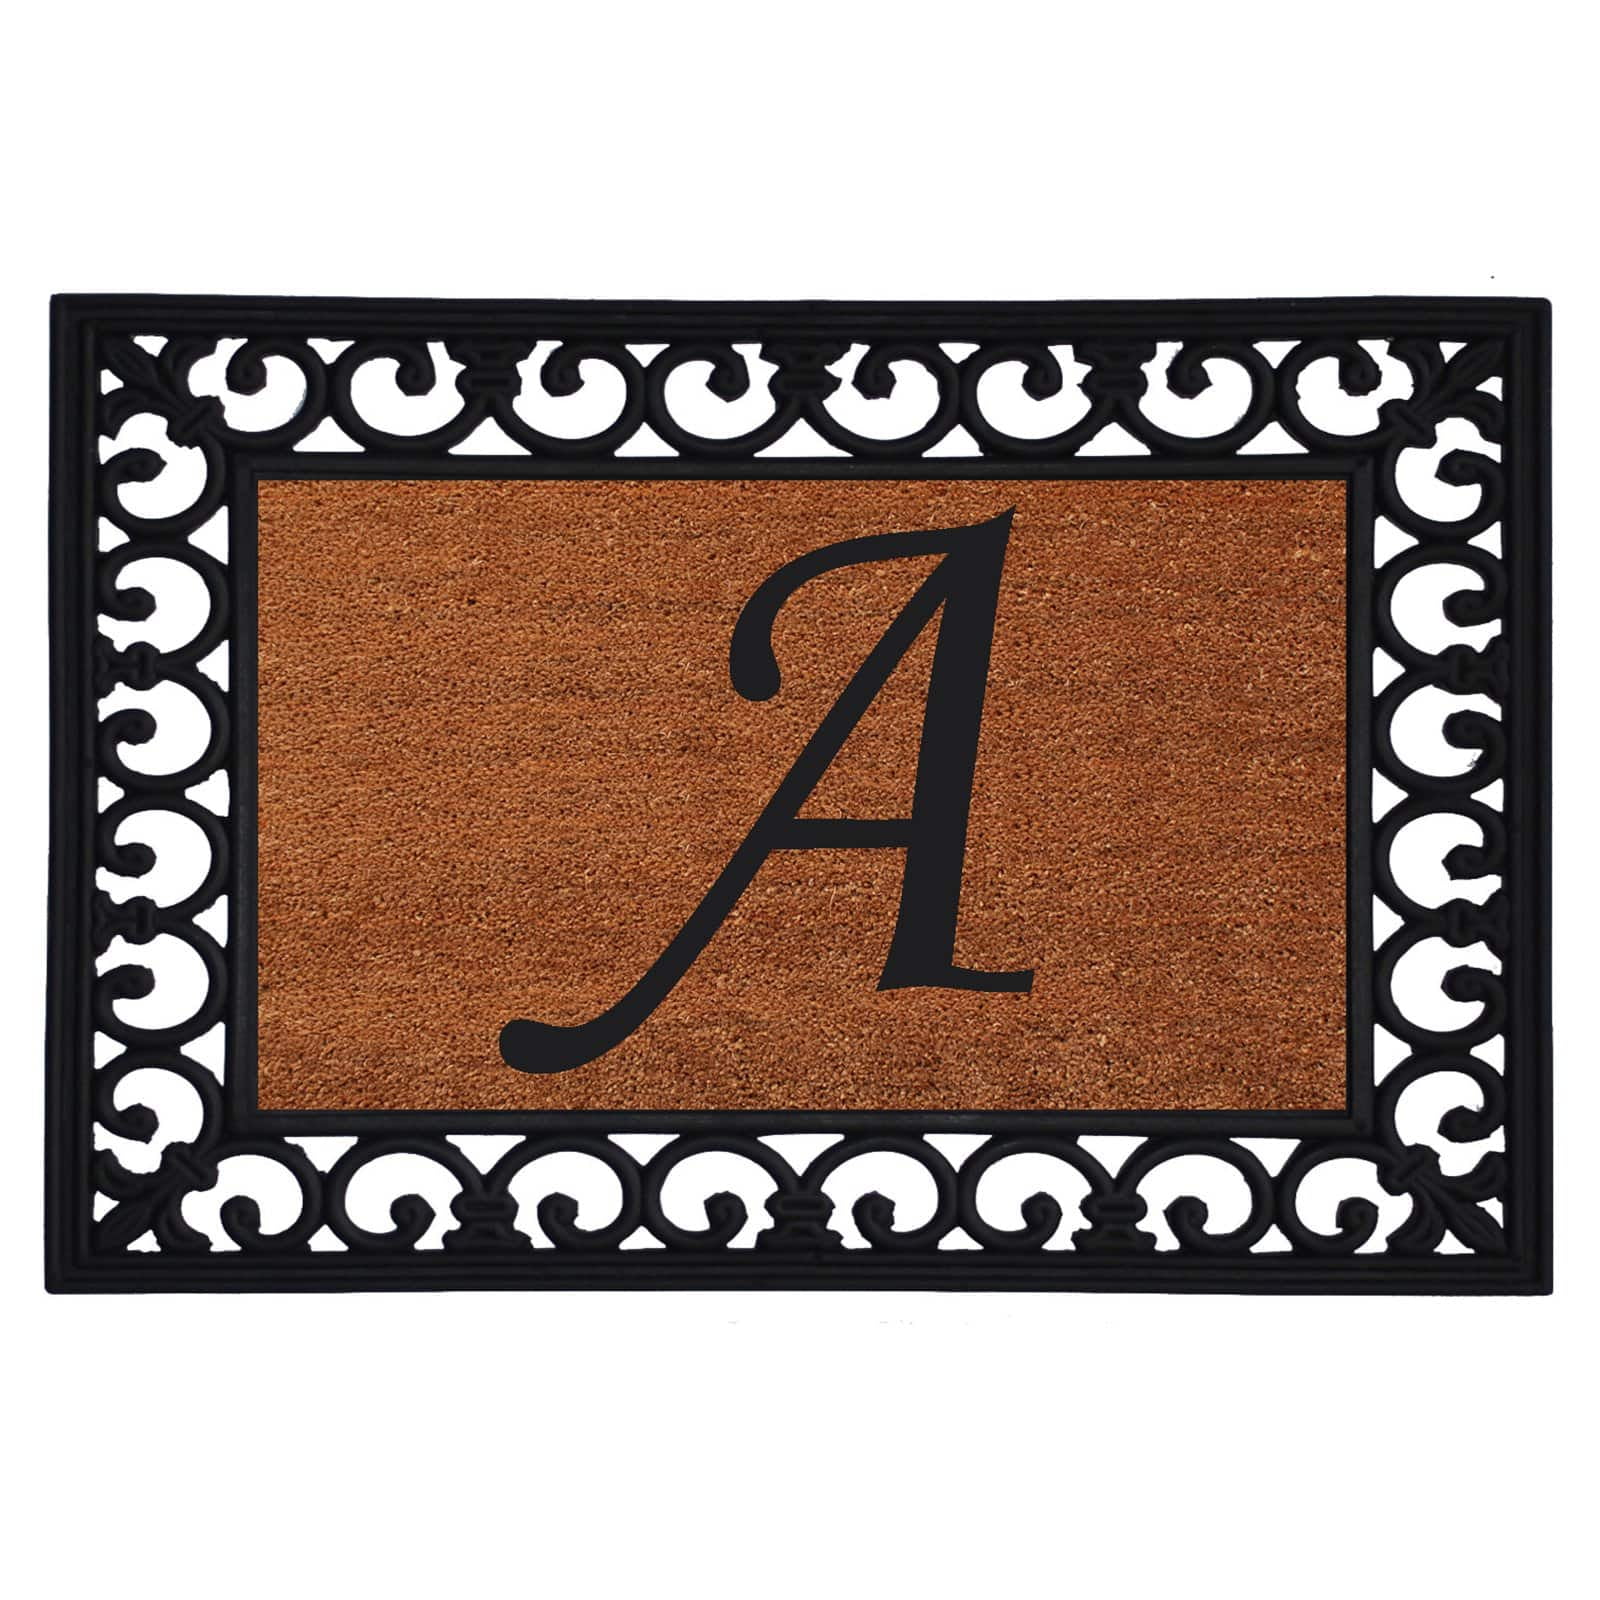 Monogram Coir 18” x 30” Doormat By US Decor Natural Outdoor Personalized Letters 